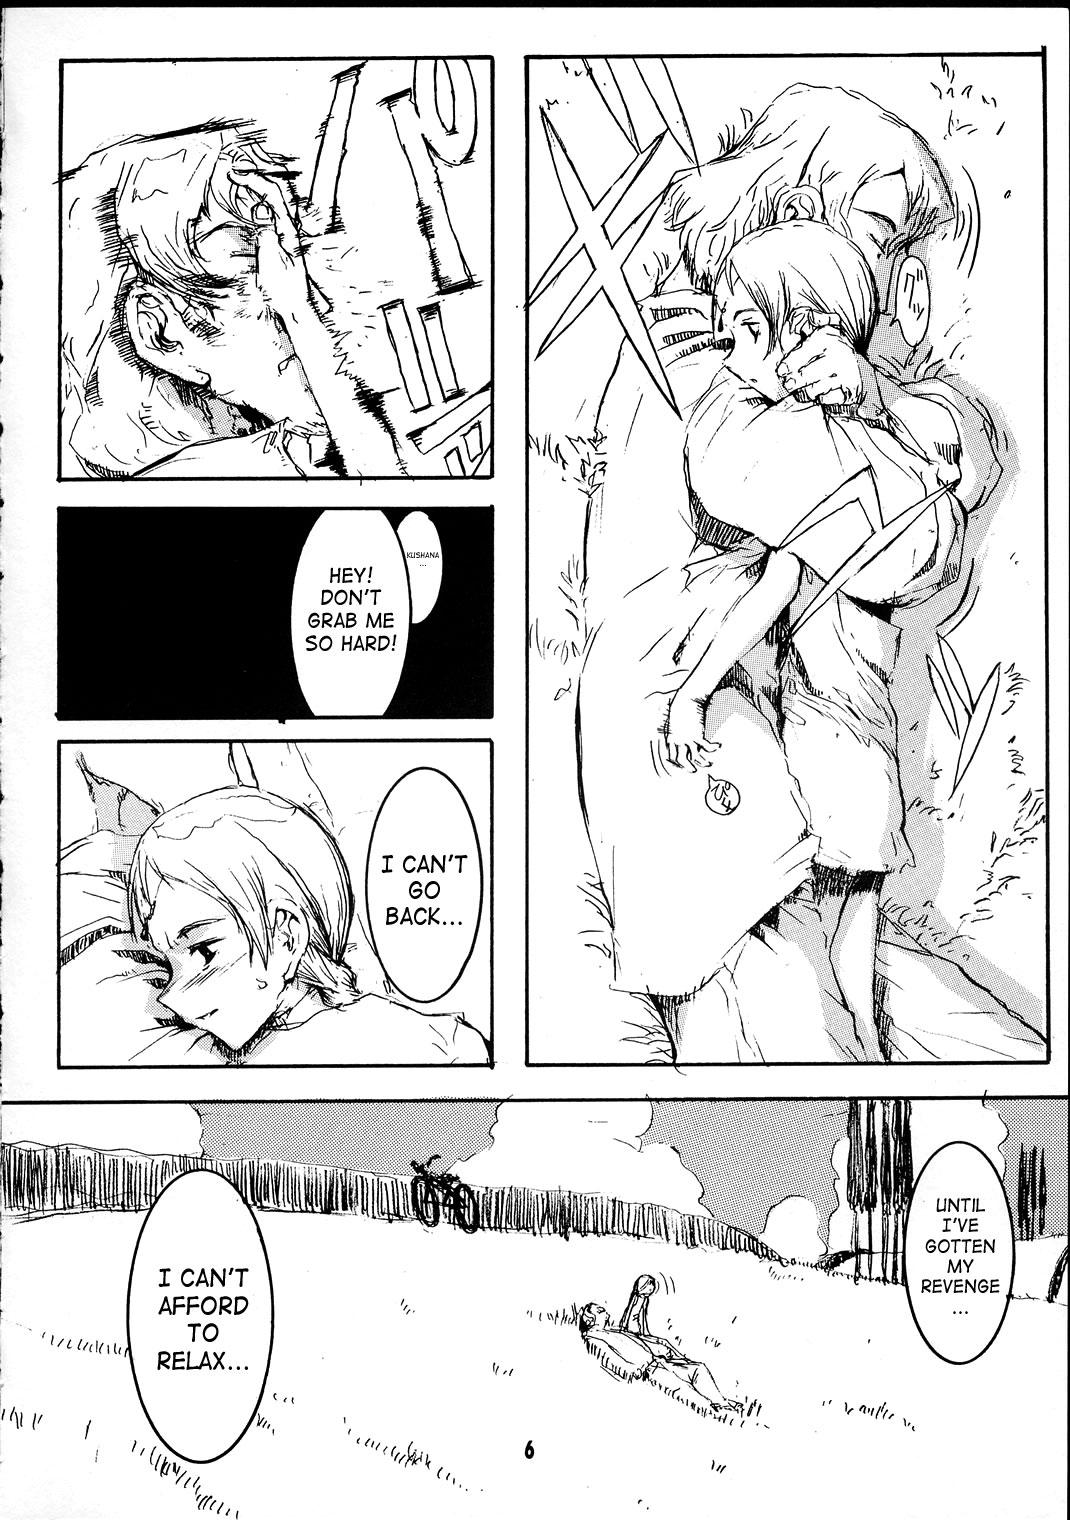 Best Blow Job Ever Forget Me Not - Nausicaa of the valley of the wind Squirt - Page 5